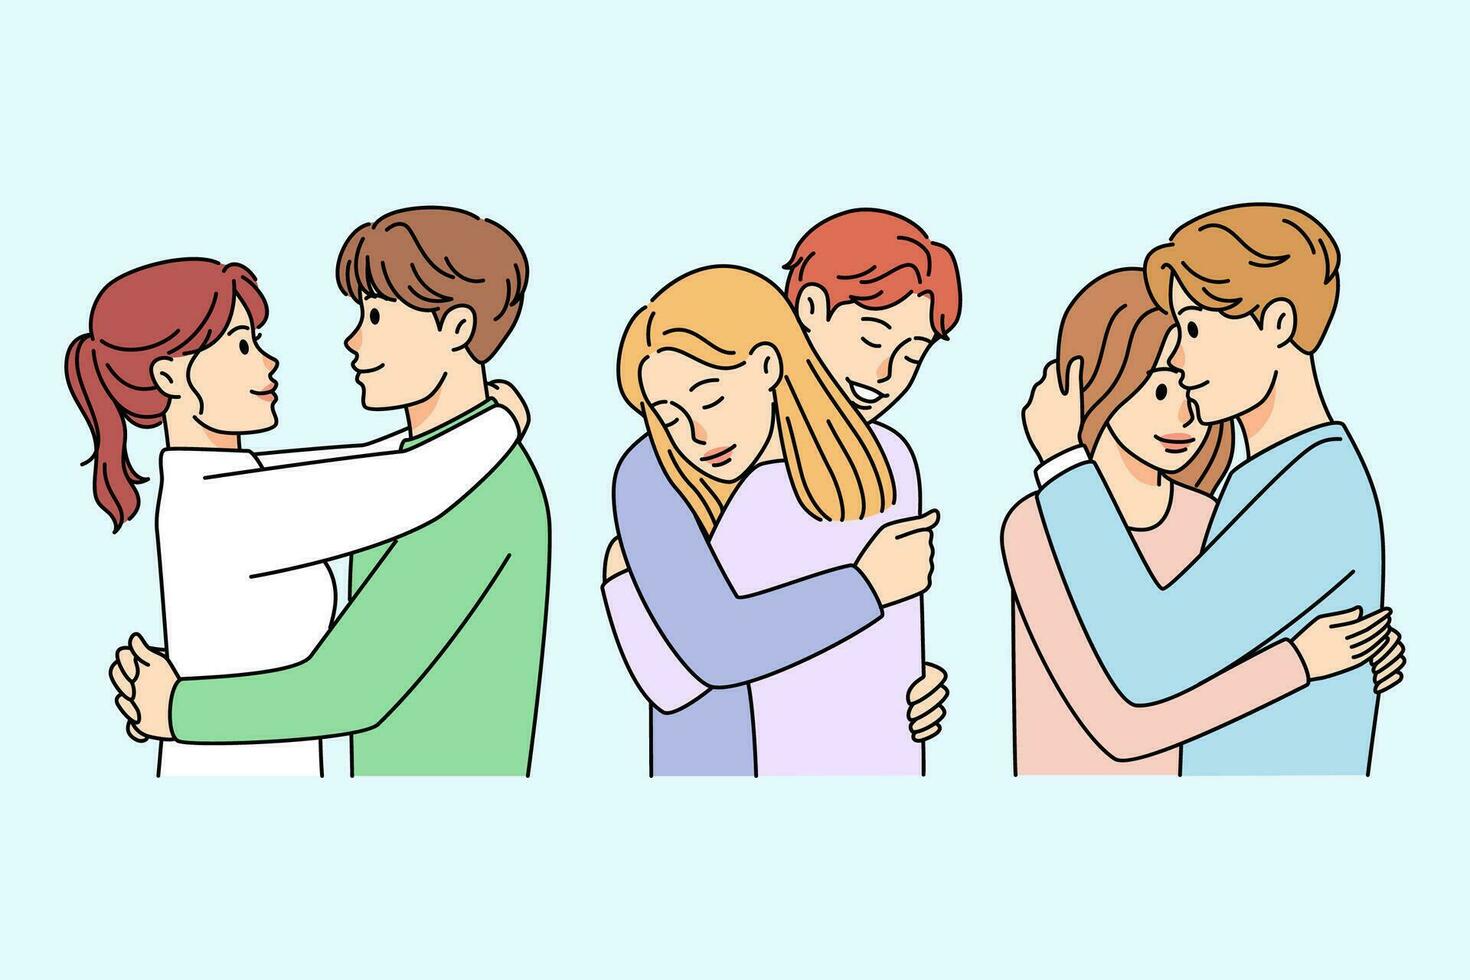 Happy couples embracing on hugging day. Smiling men and women cuddle show love and care. People relationship concept. Vector illustration.